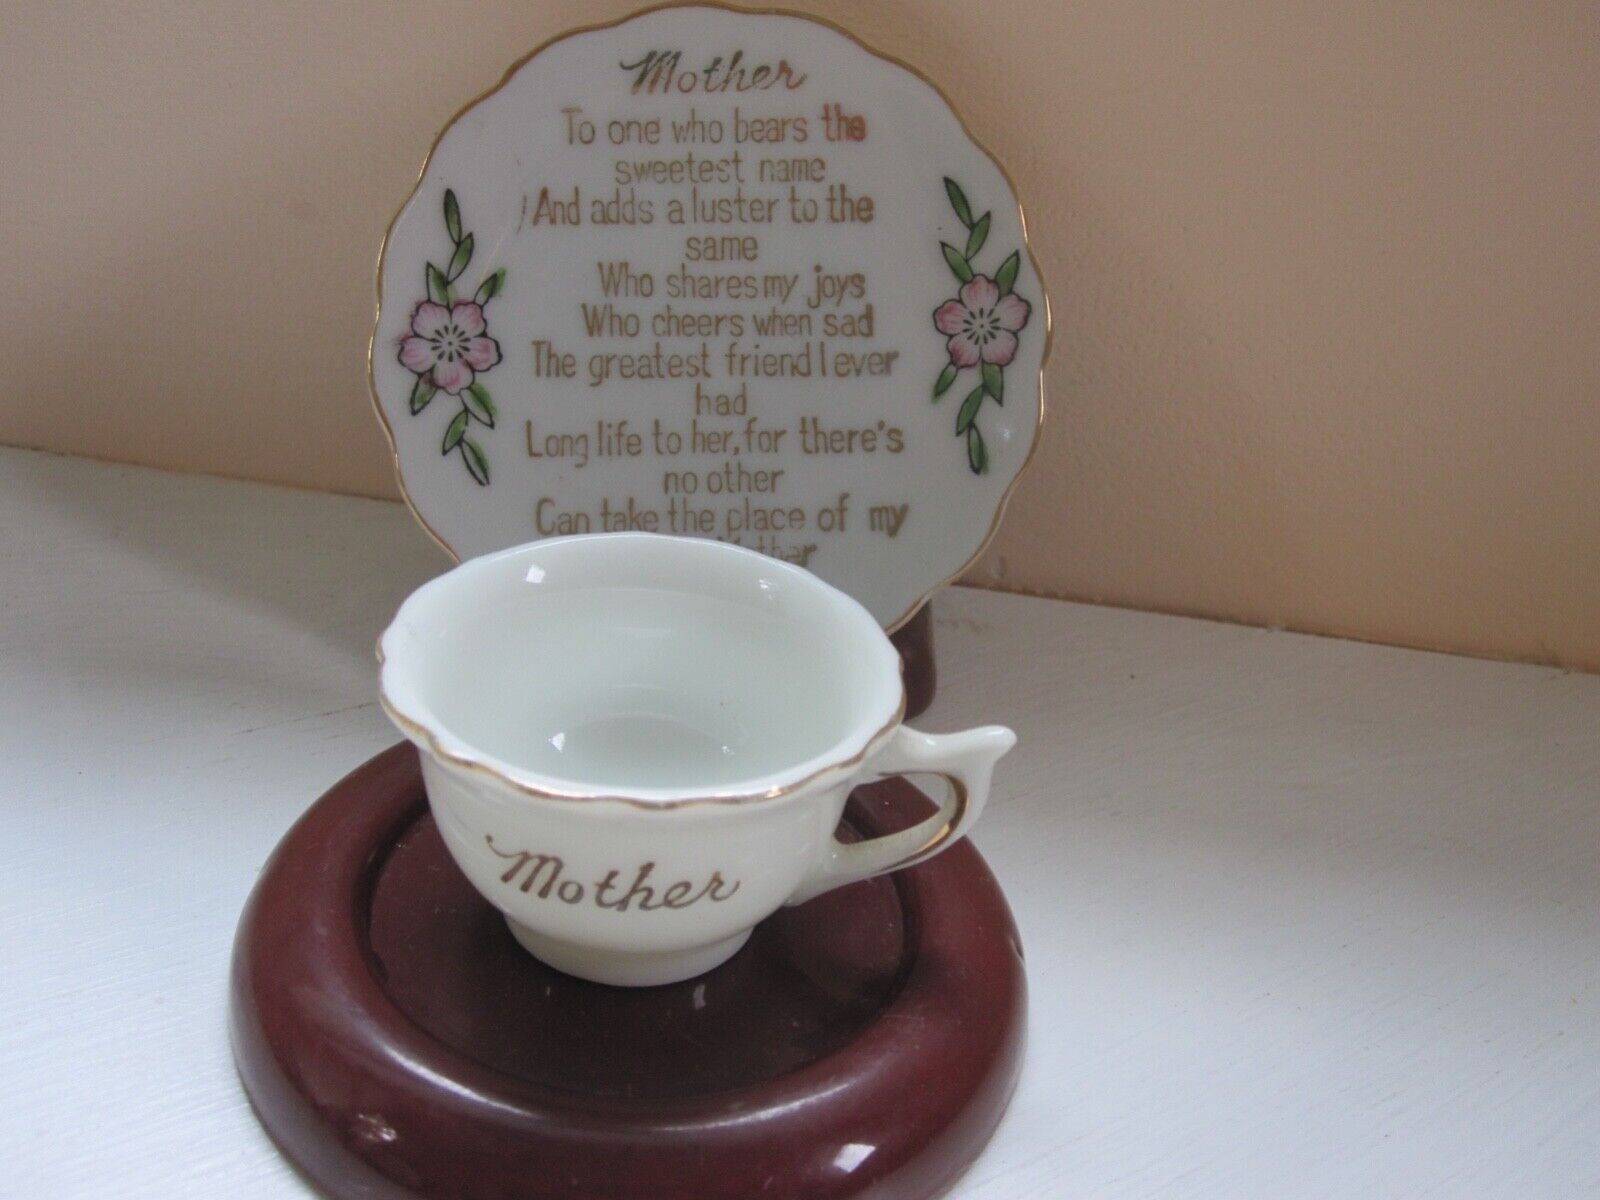 Vintage Tiny Gold Trimmed Plate and Cup With Verse For Mother